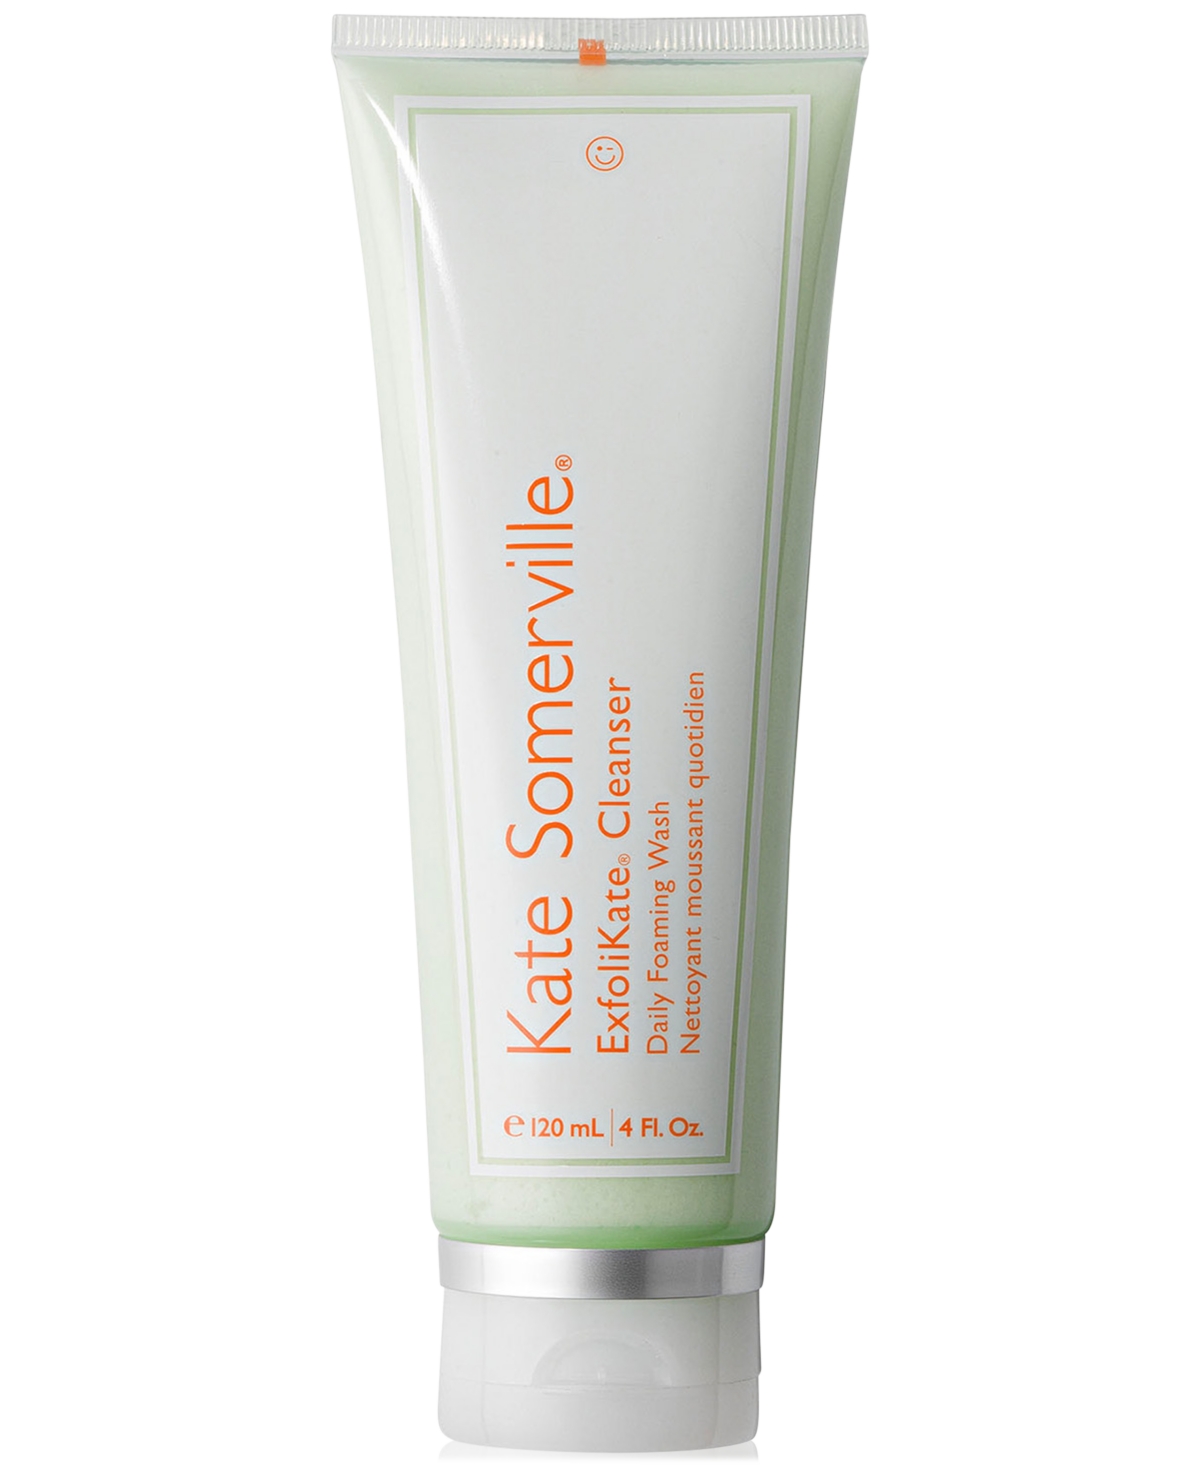 ExfoliKate Cleanser Daily Foaming Wash, 4 oz.